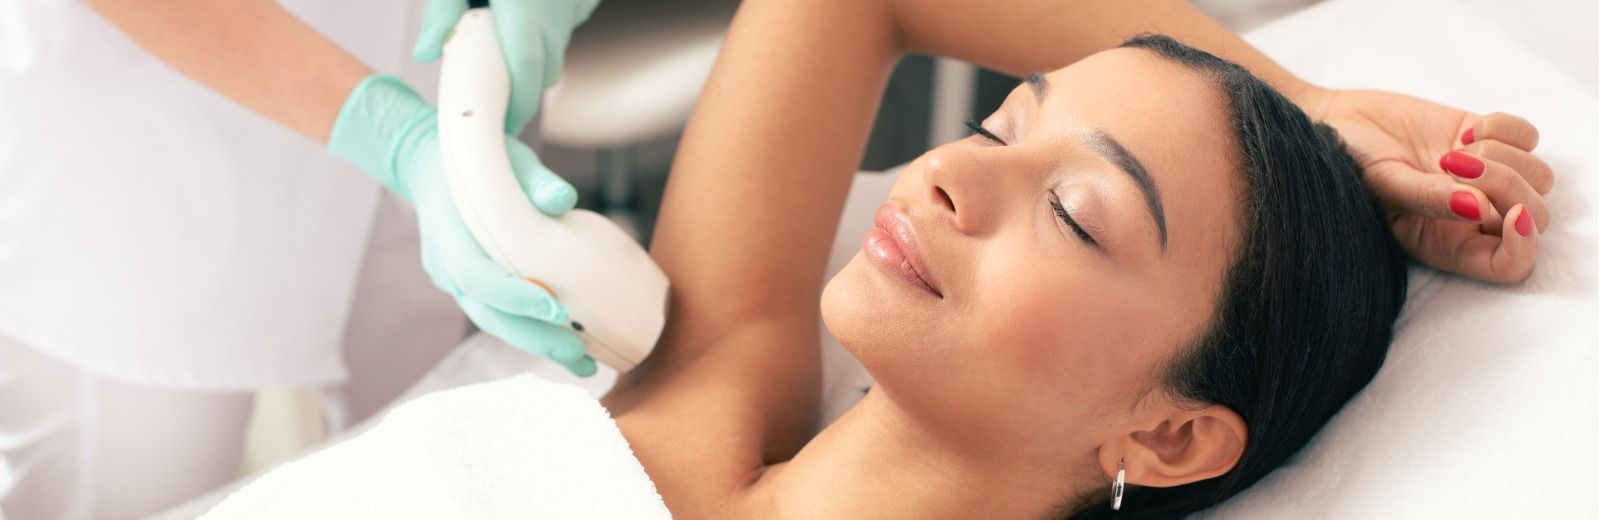 Laser & Hair Removal Treatments